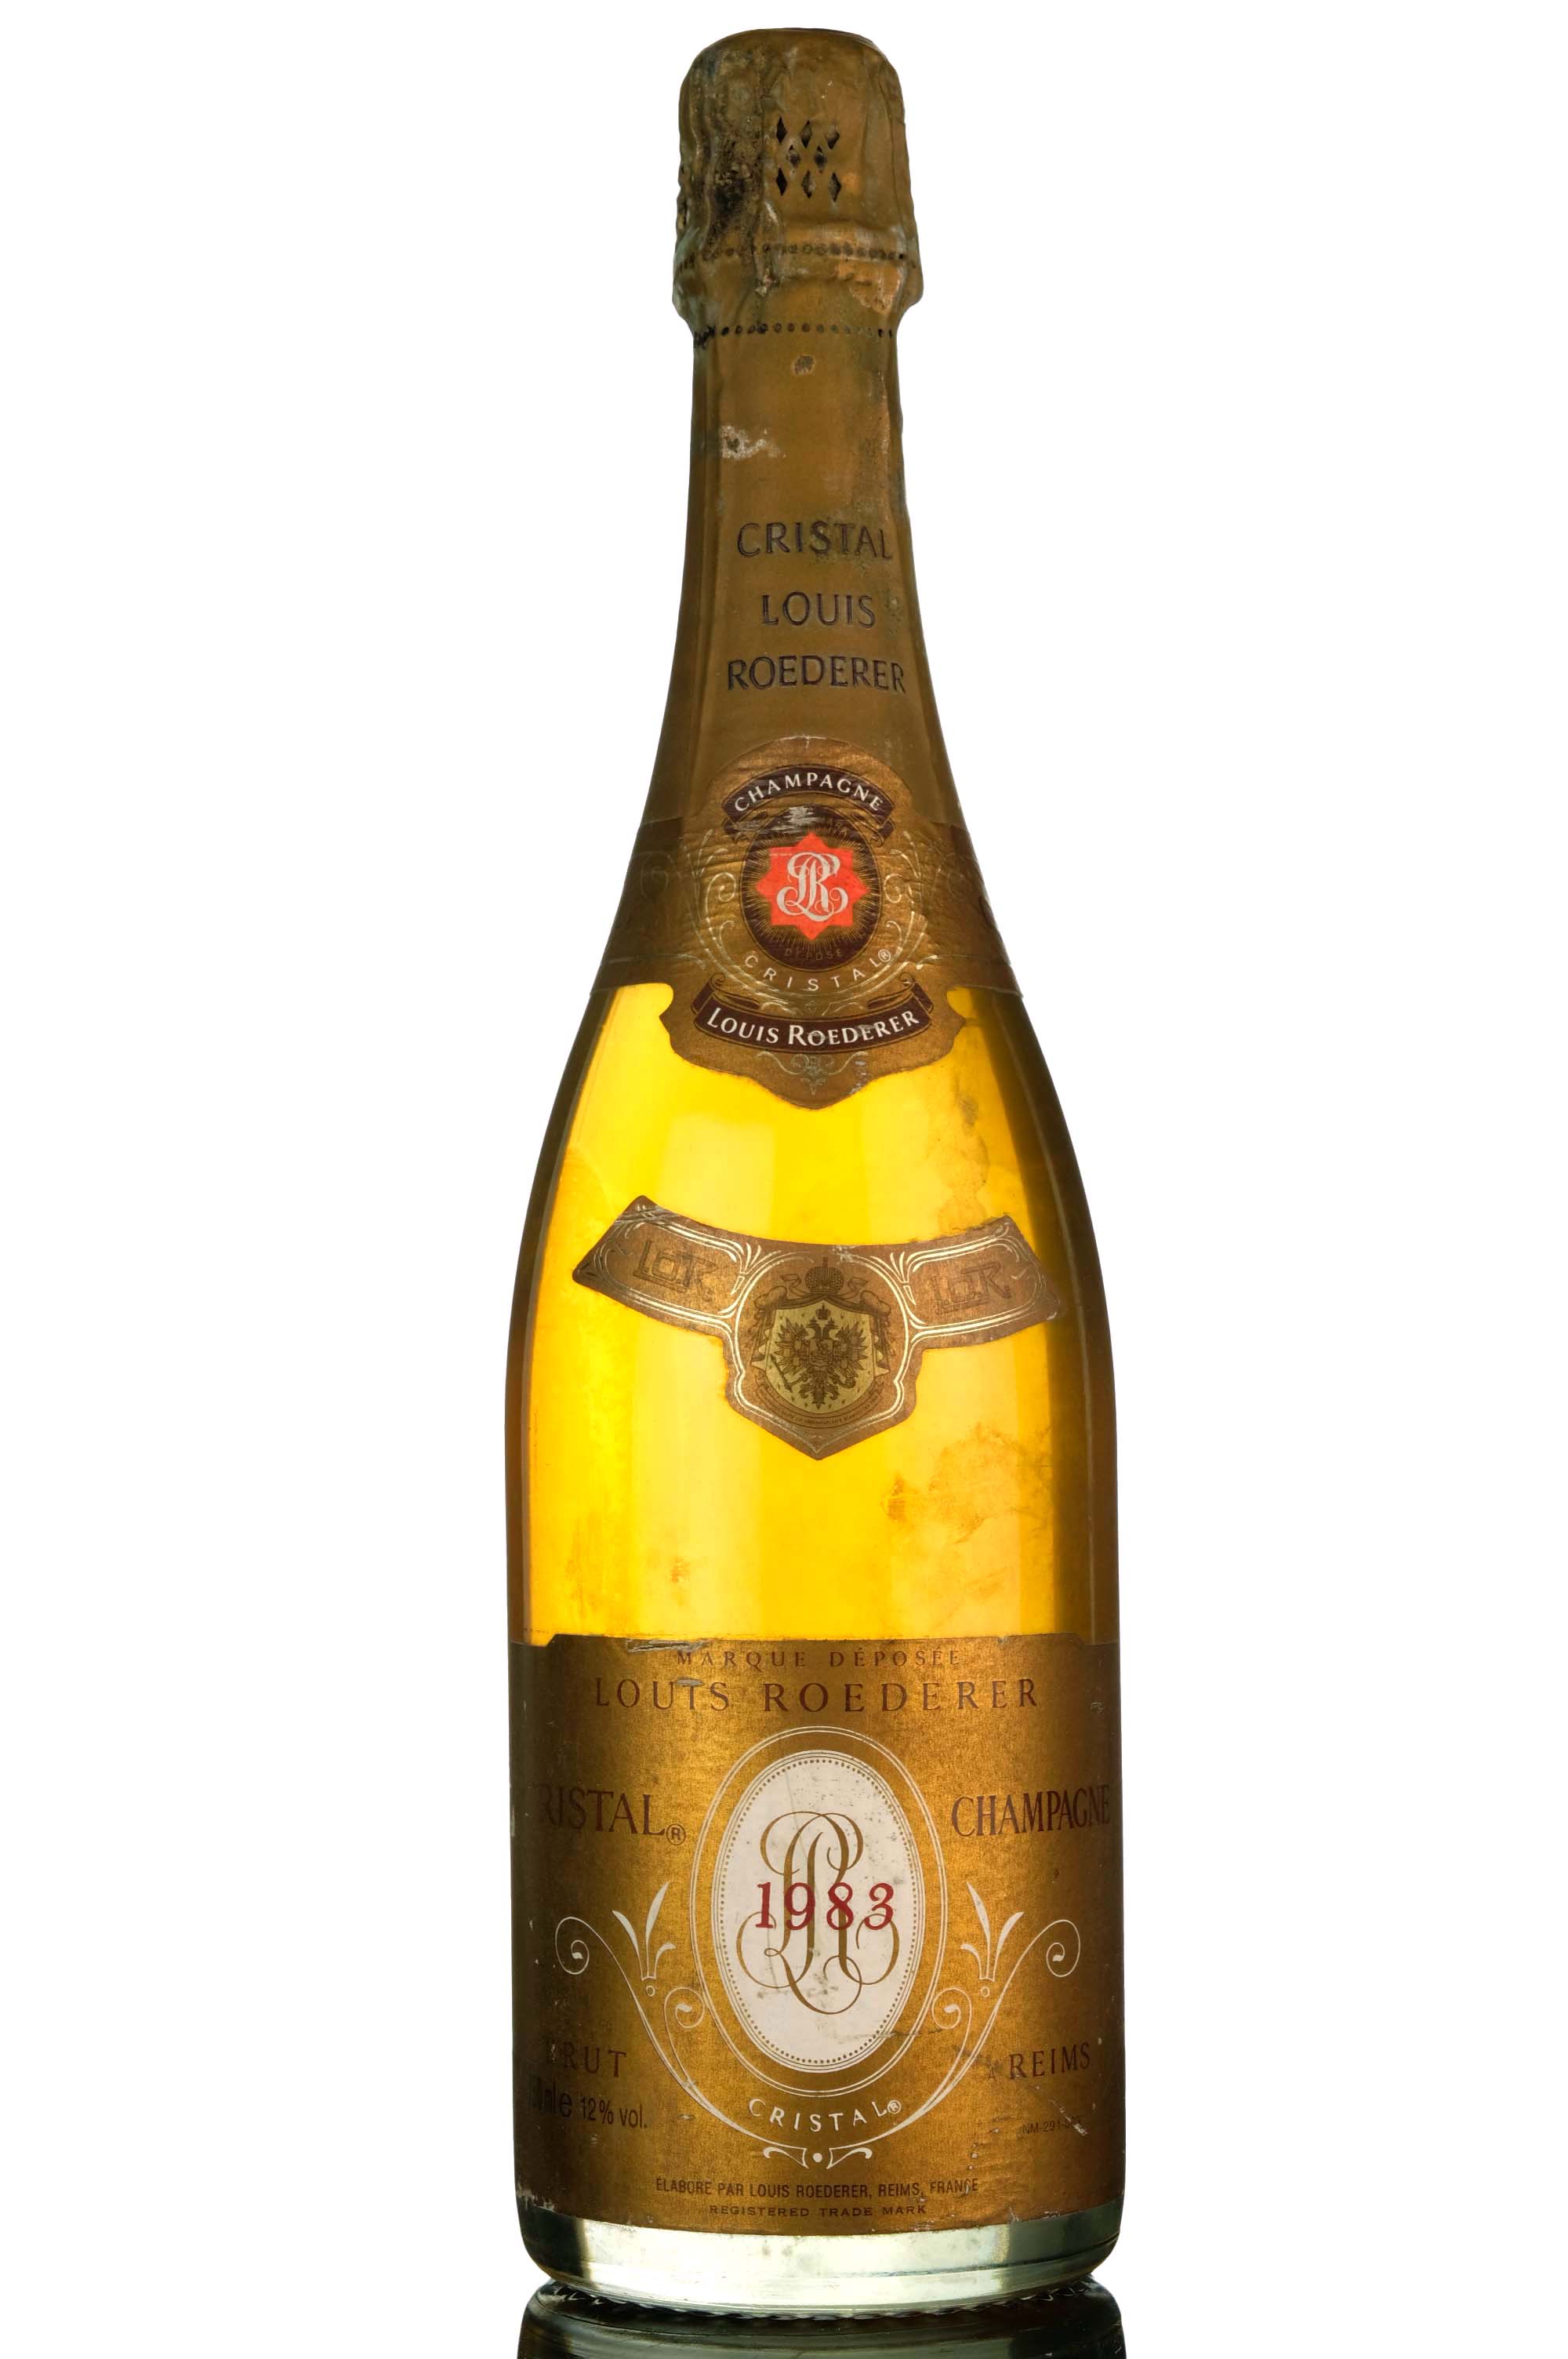 Louis Roederer 1983 Cristal Champagne